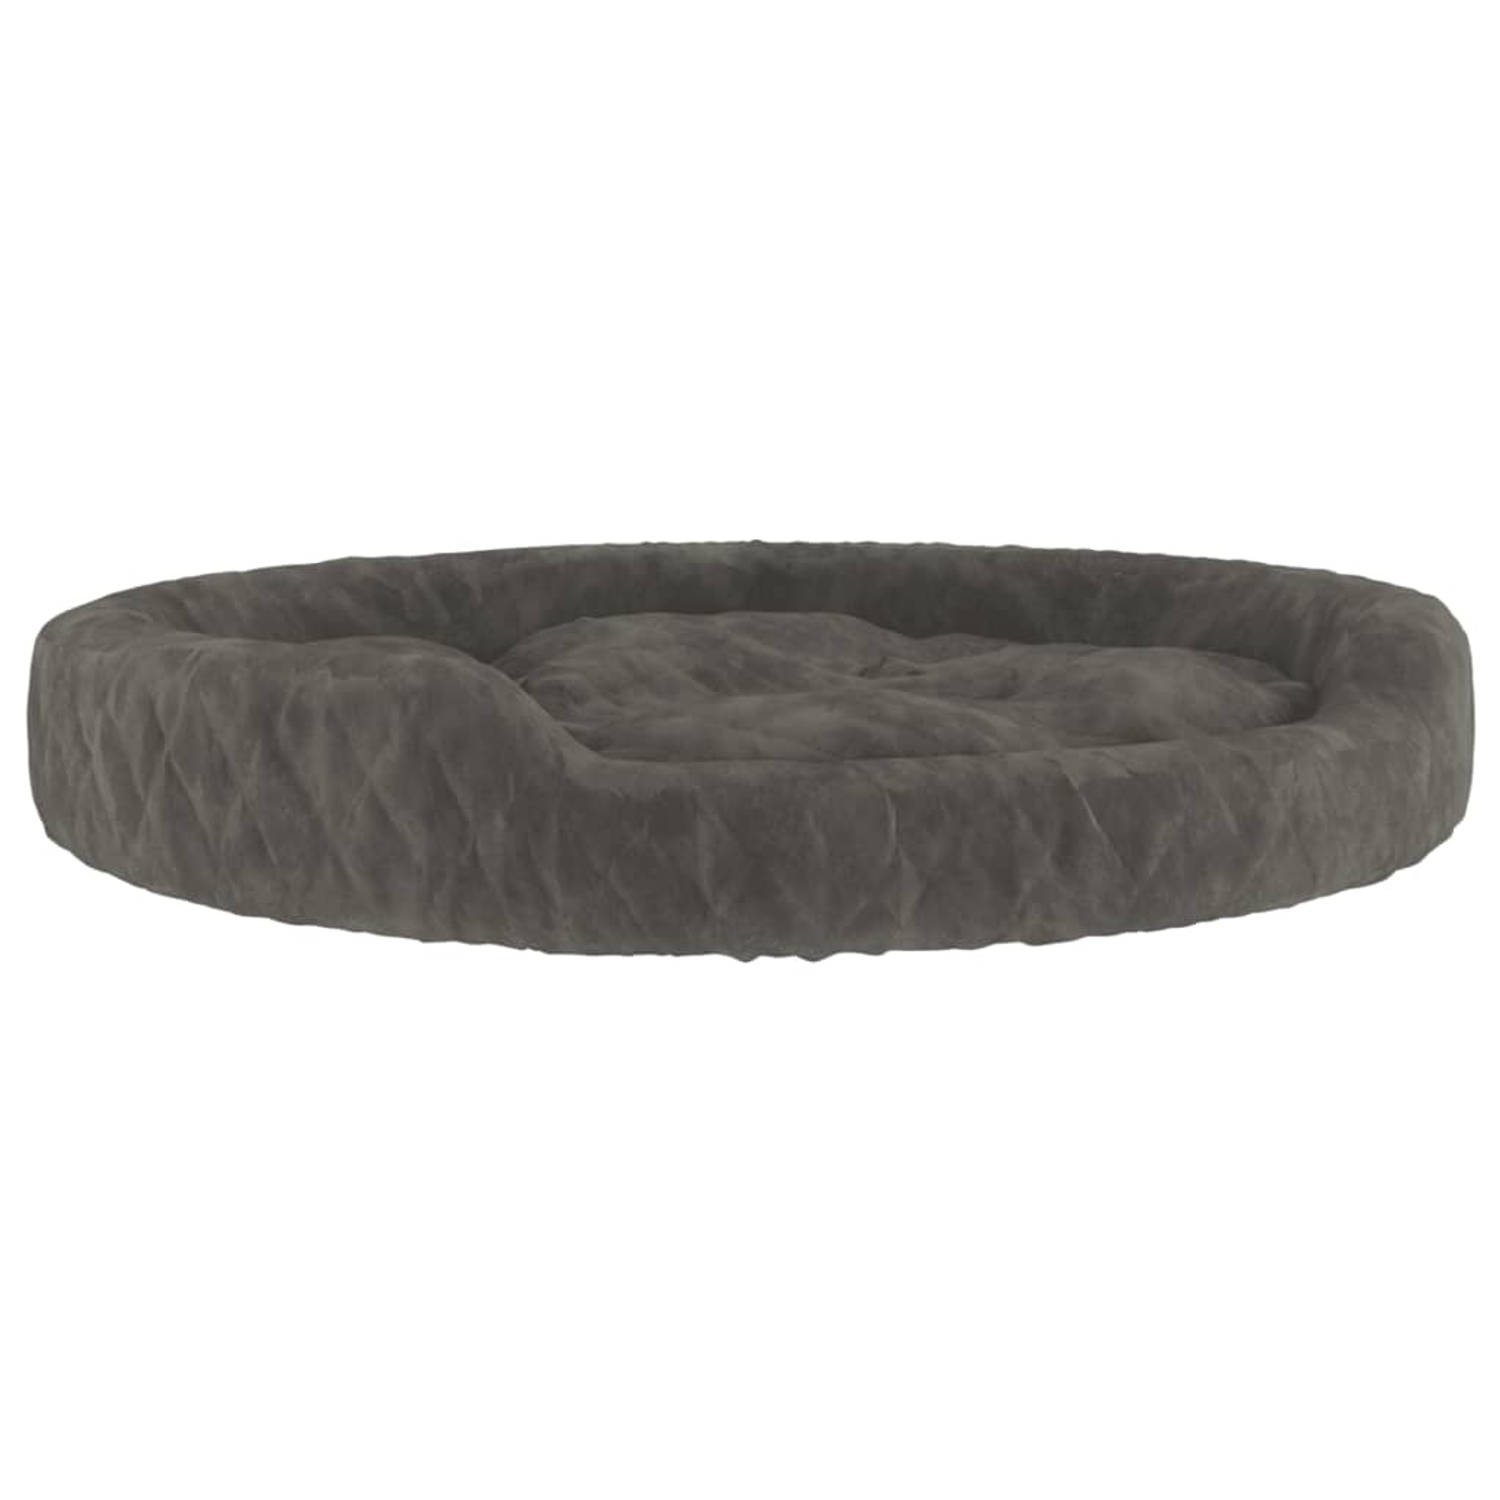 The Living Store Hondenbed Dierenbed - 90x70x23 cm - Donkergrijs